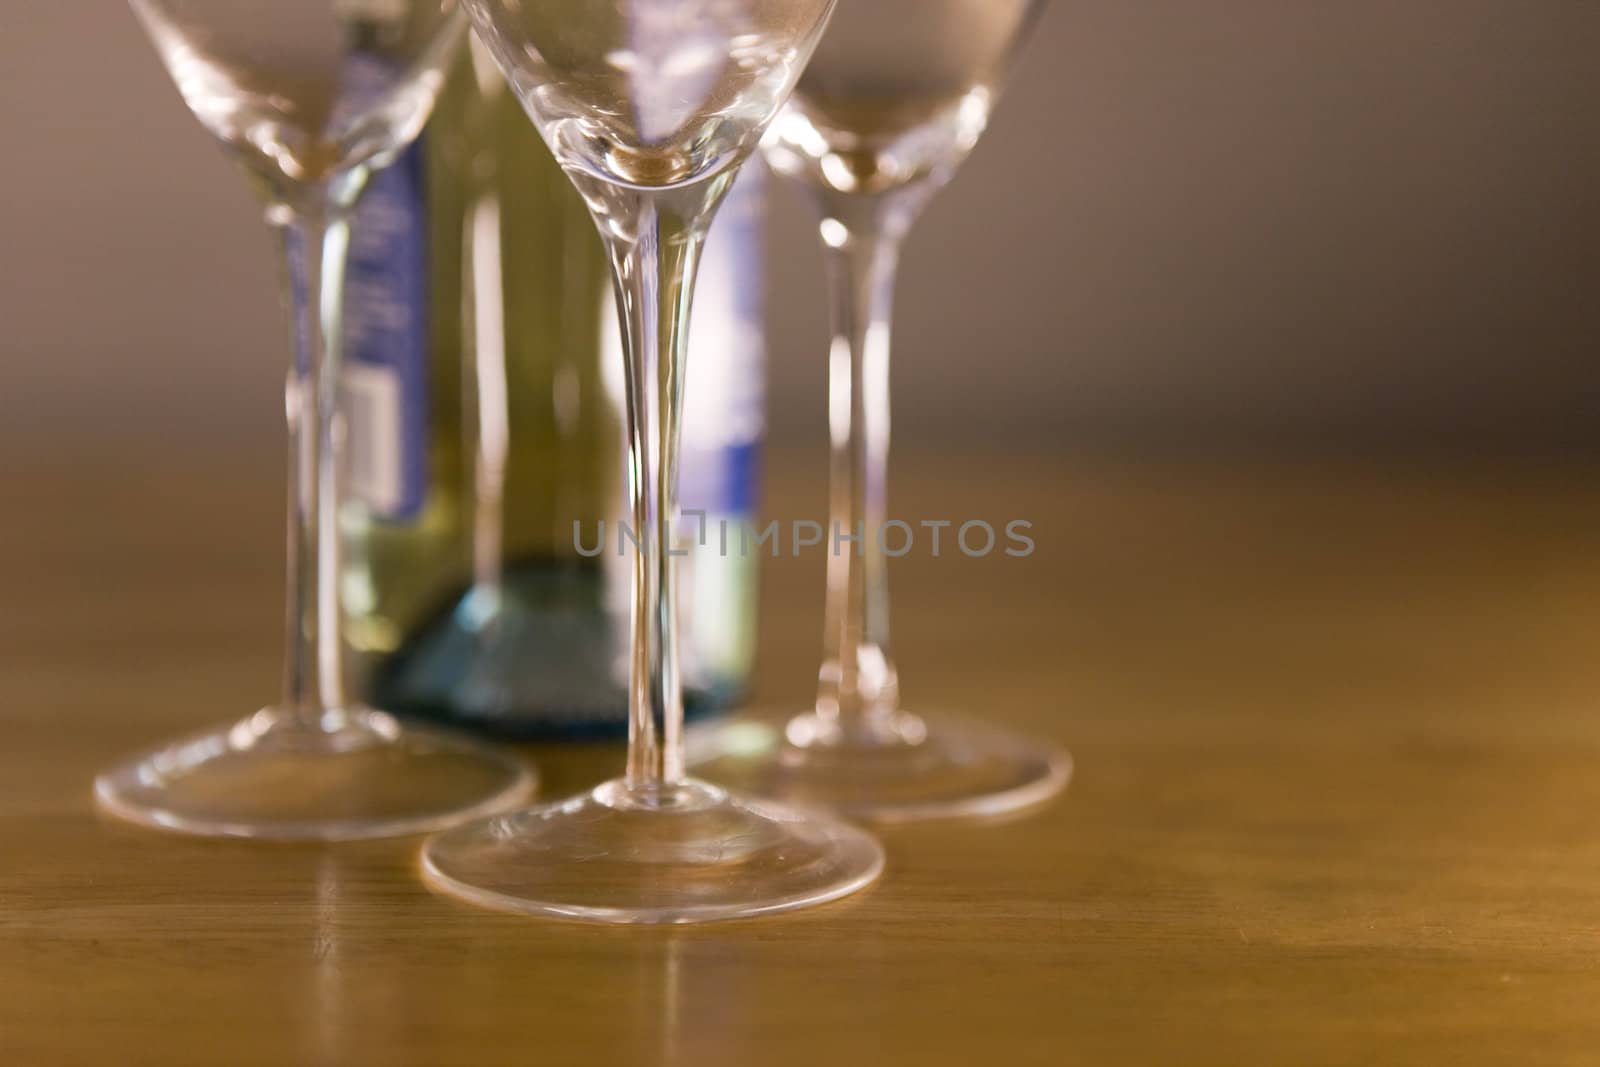 Three empty wine glasses and a bottle on a wooden table